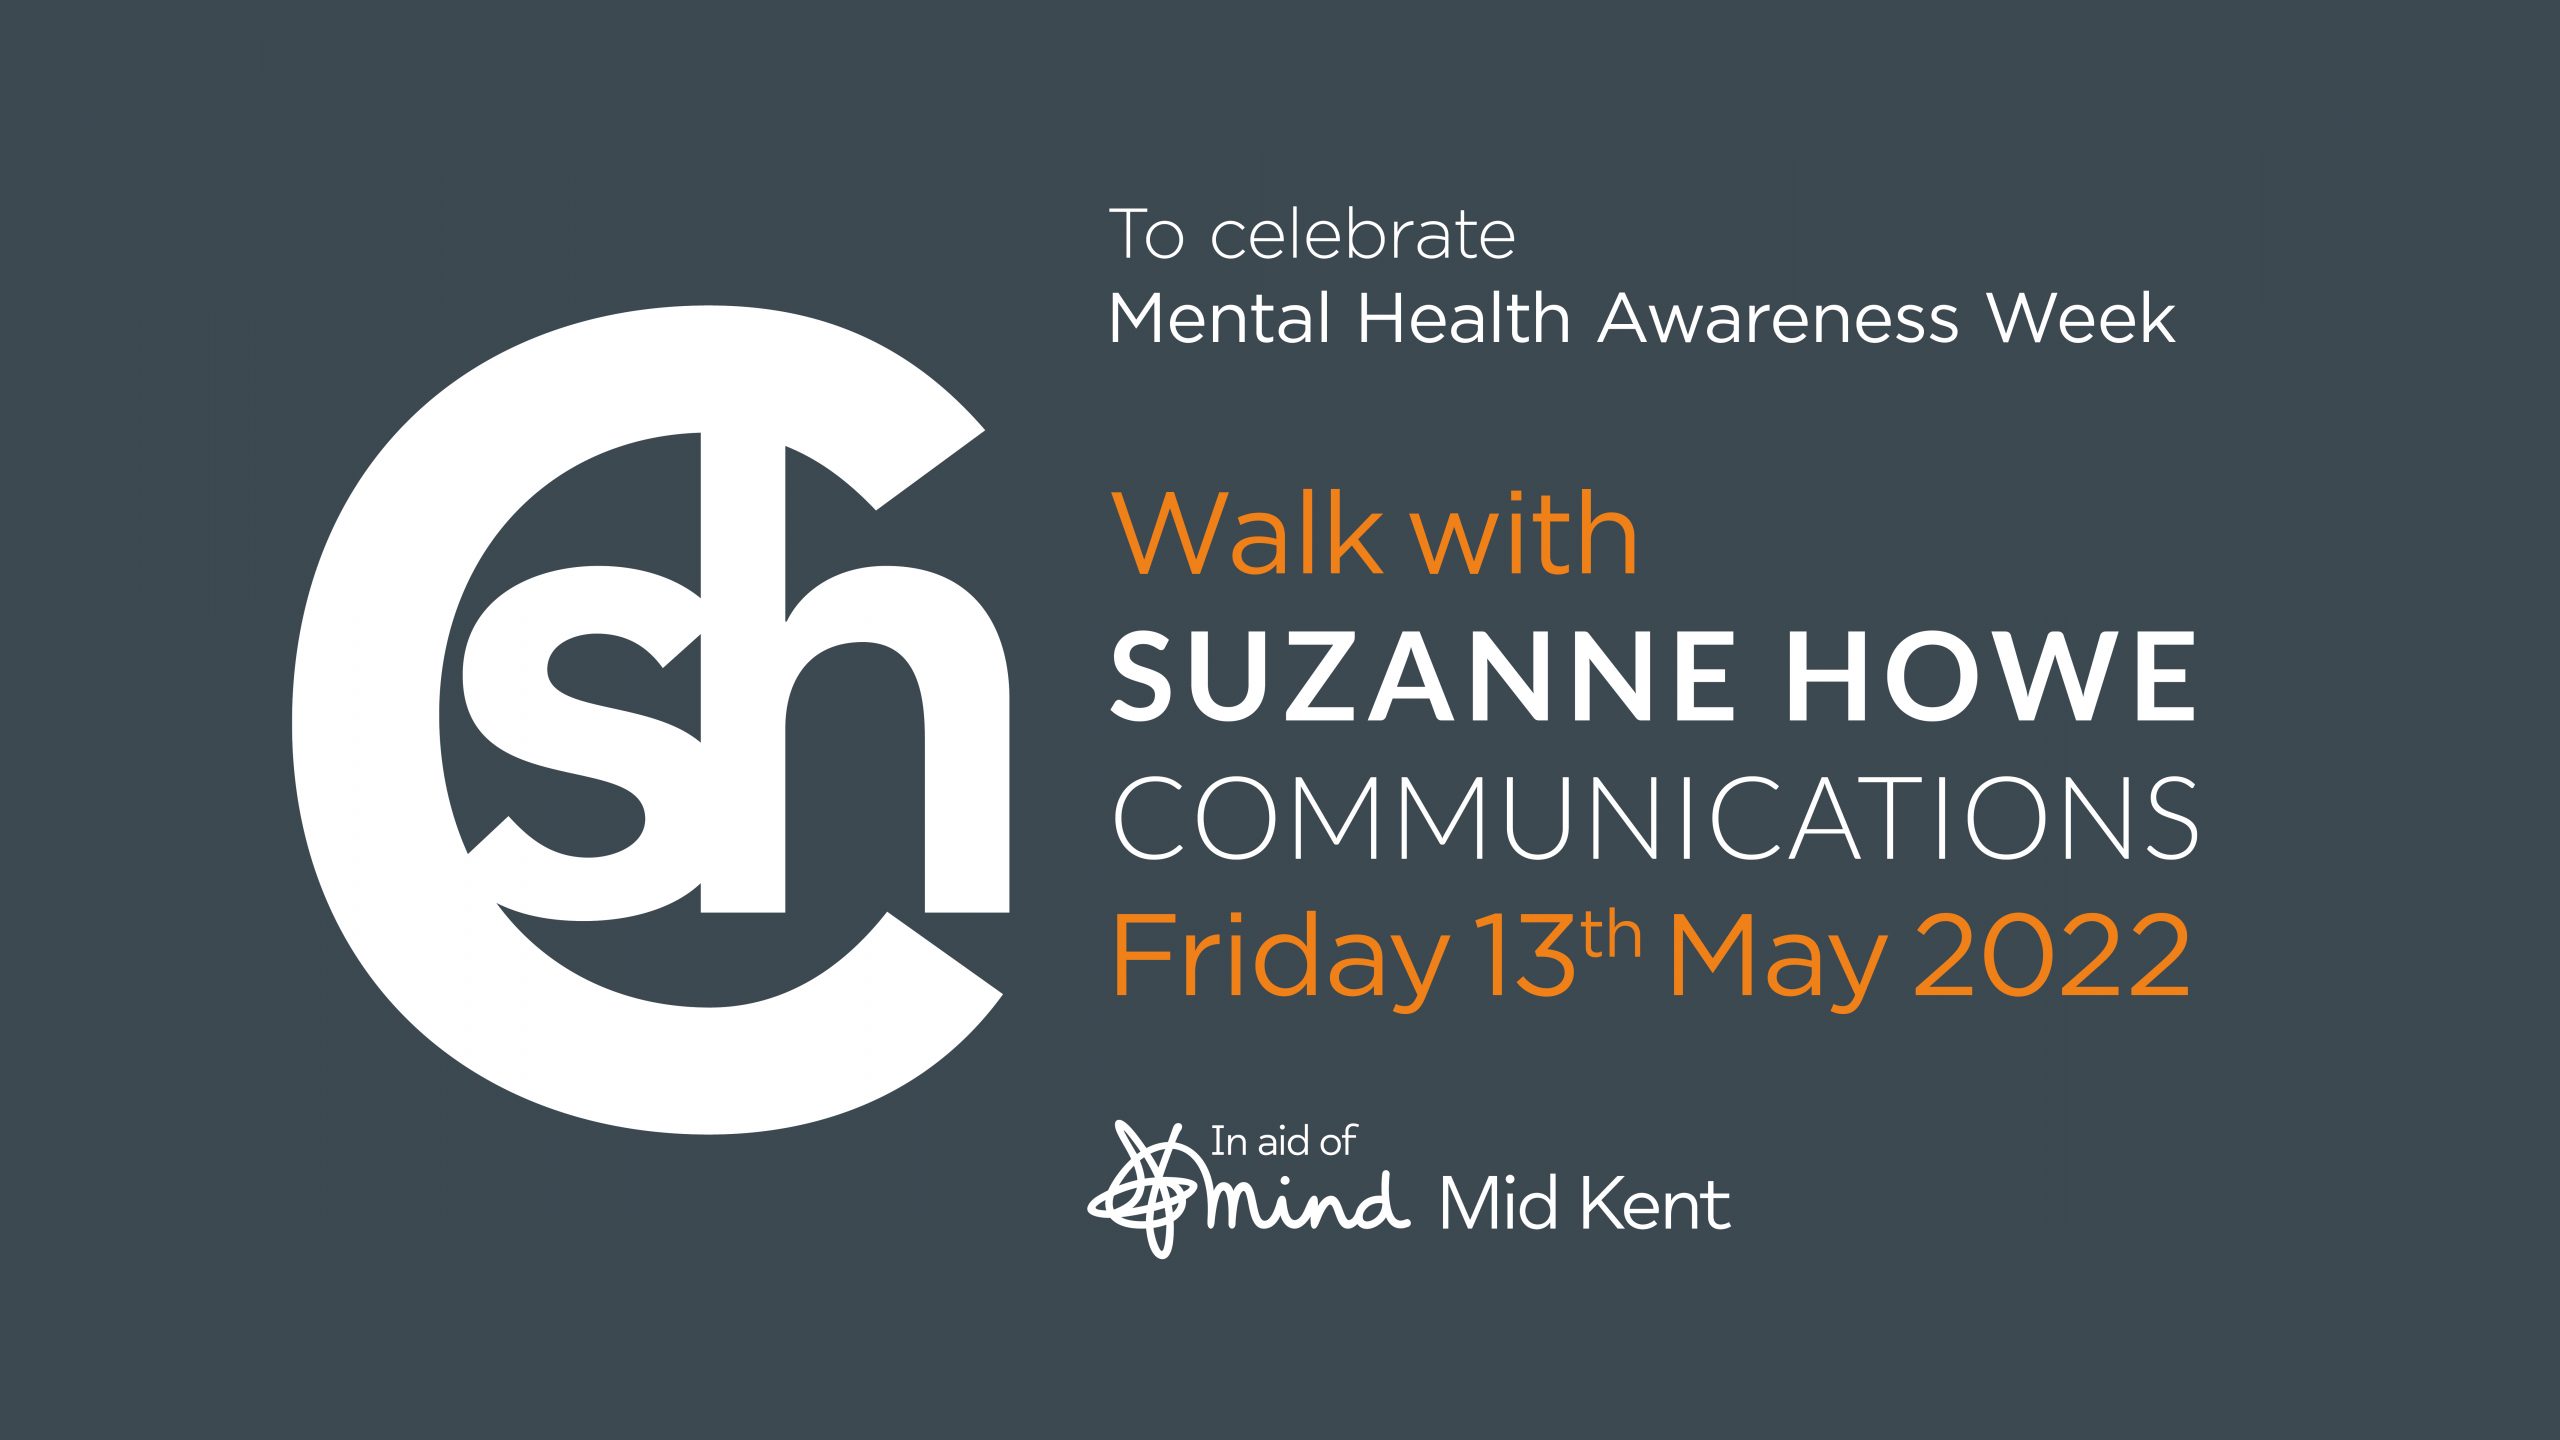 Walk with Suzanne Howe Communications on 13th May to celebrate Mental Health Awareness Week